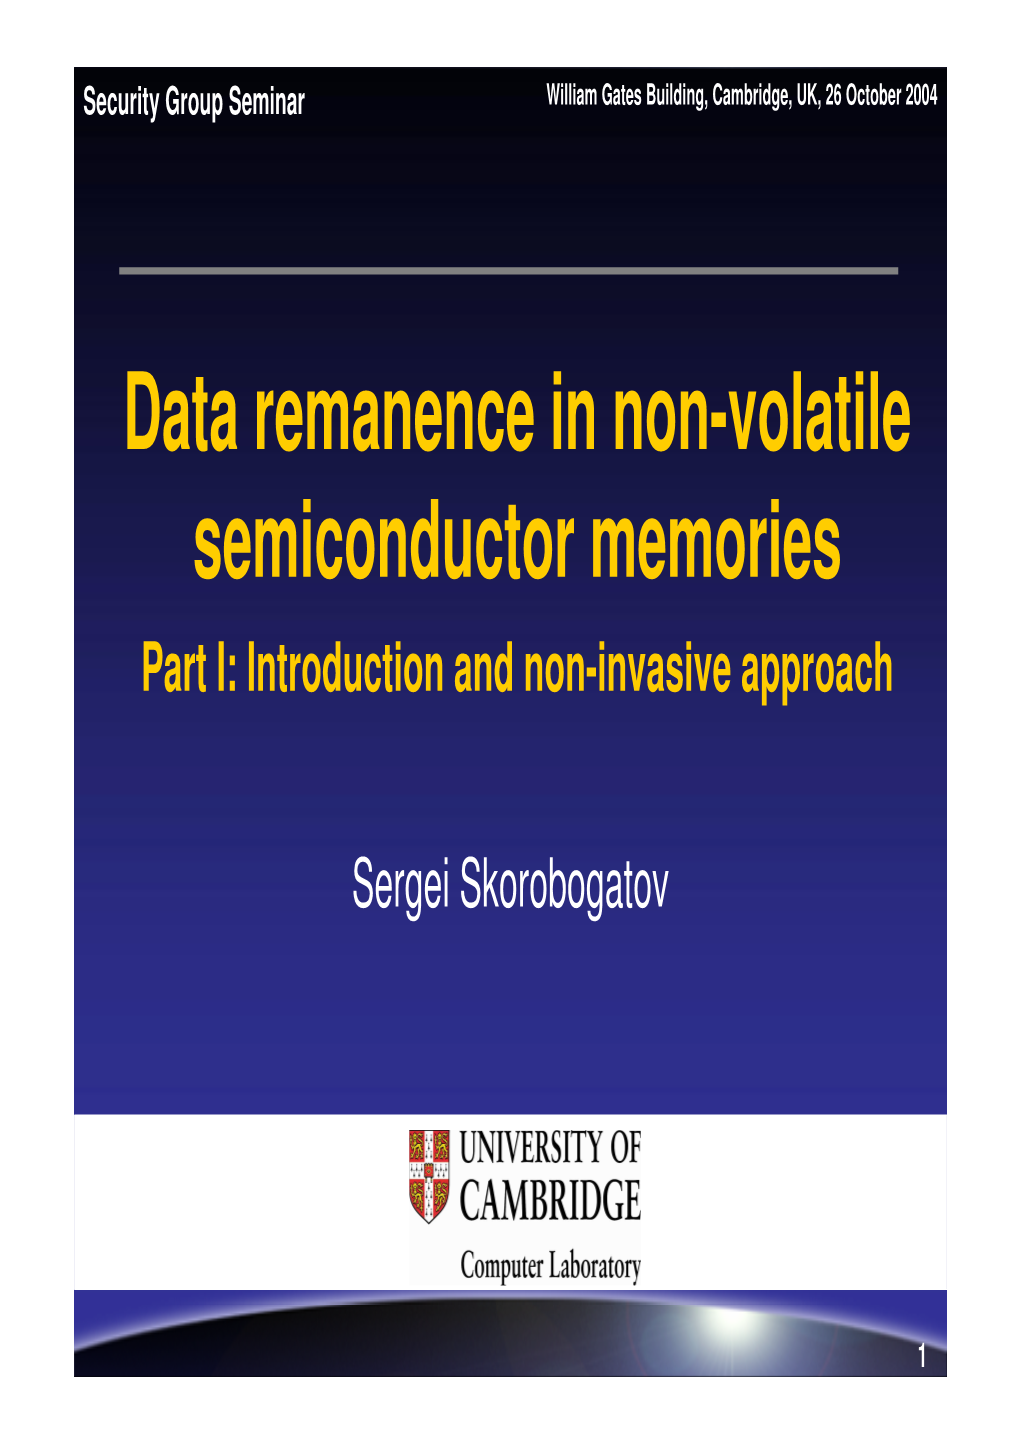 Data Remanence in Non-Volatile Semiconductor Memories Part I: Introduction and Non-Invasive Approach